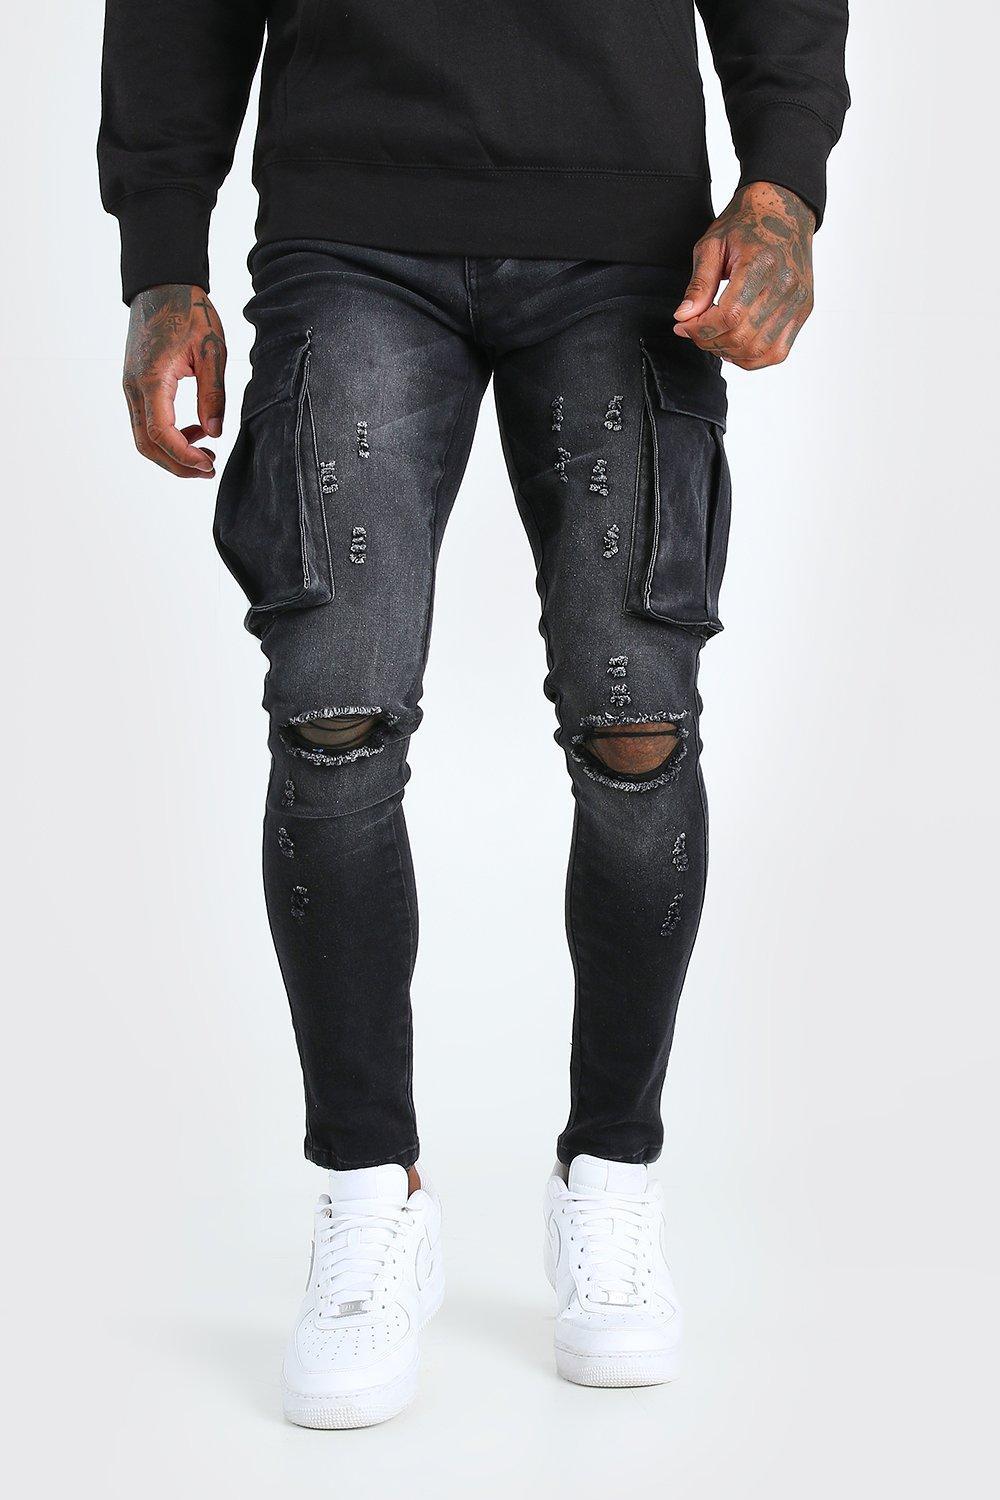 BoohooMAN Denim Super Skinny Cargo Jean With Knee Rips in Washed Black  (Black) for Men - Lyst